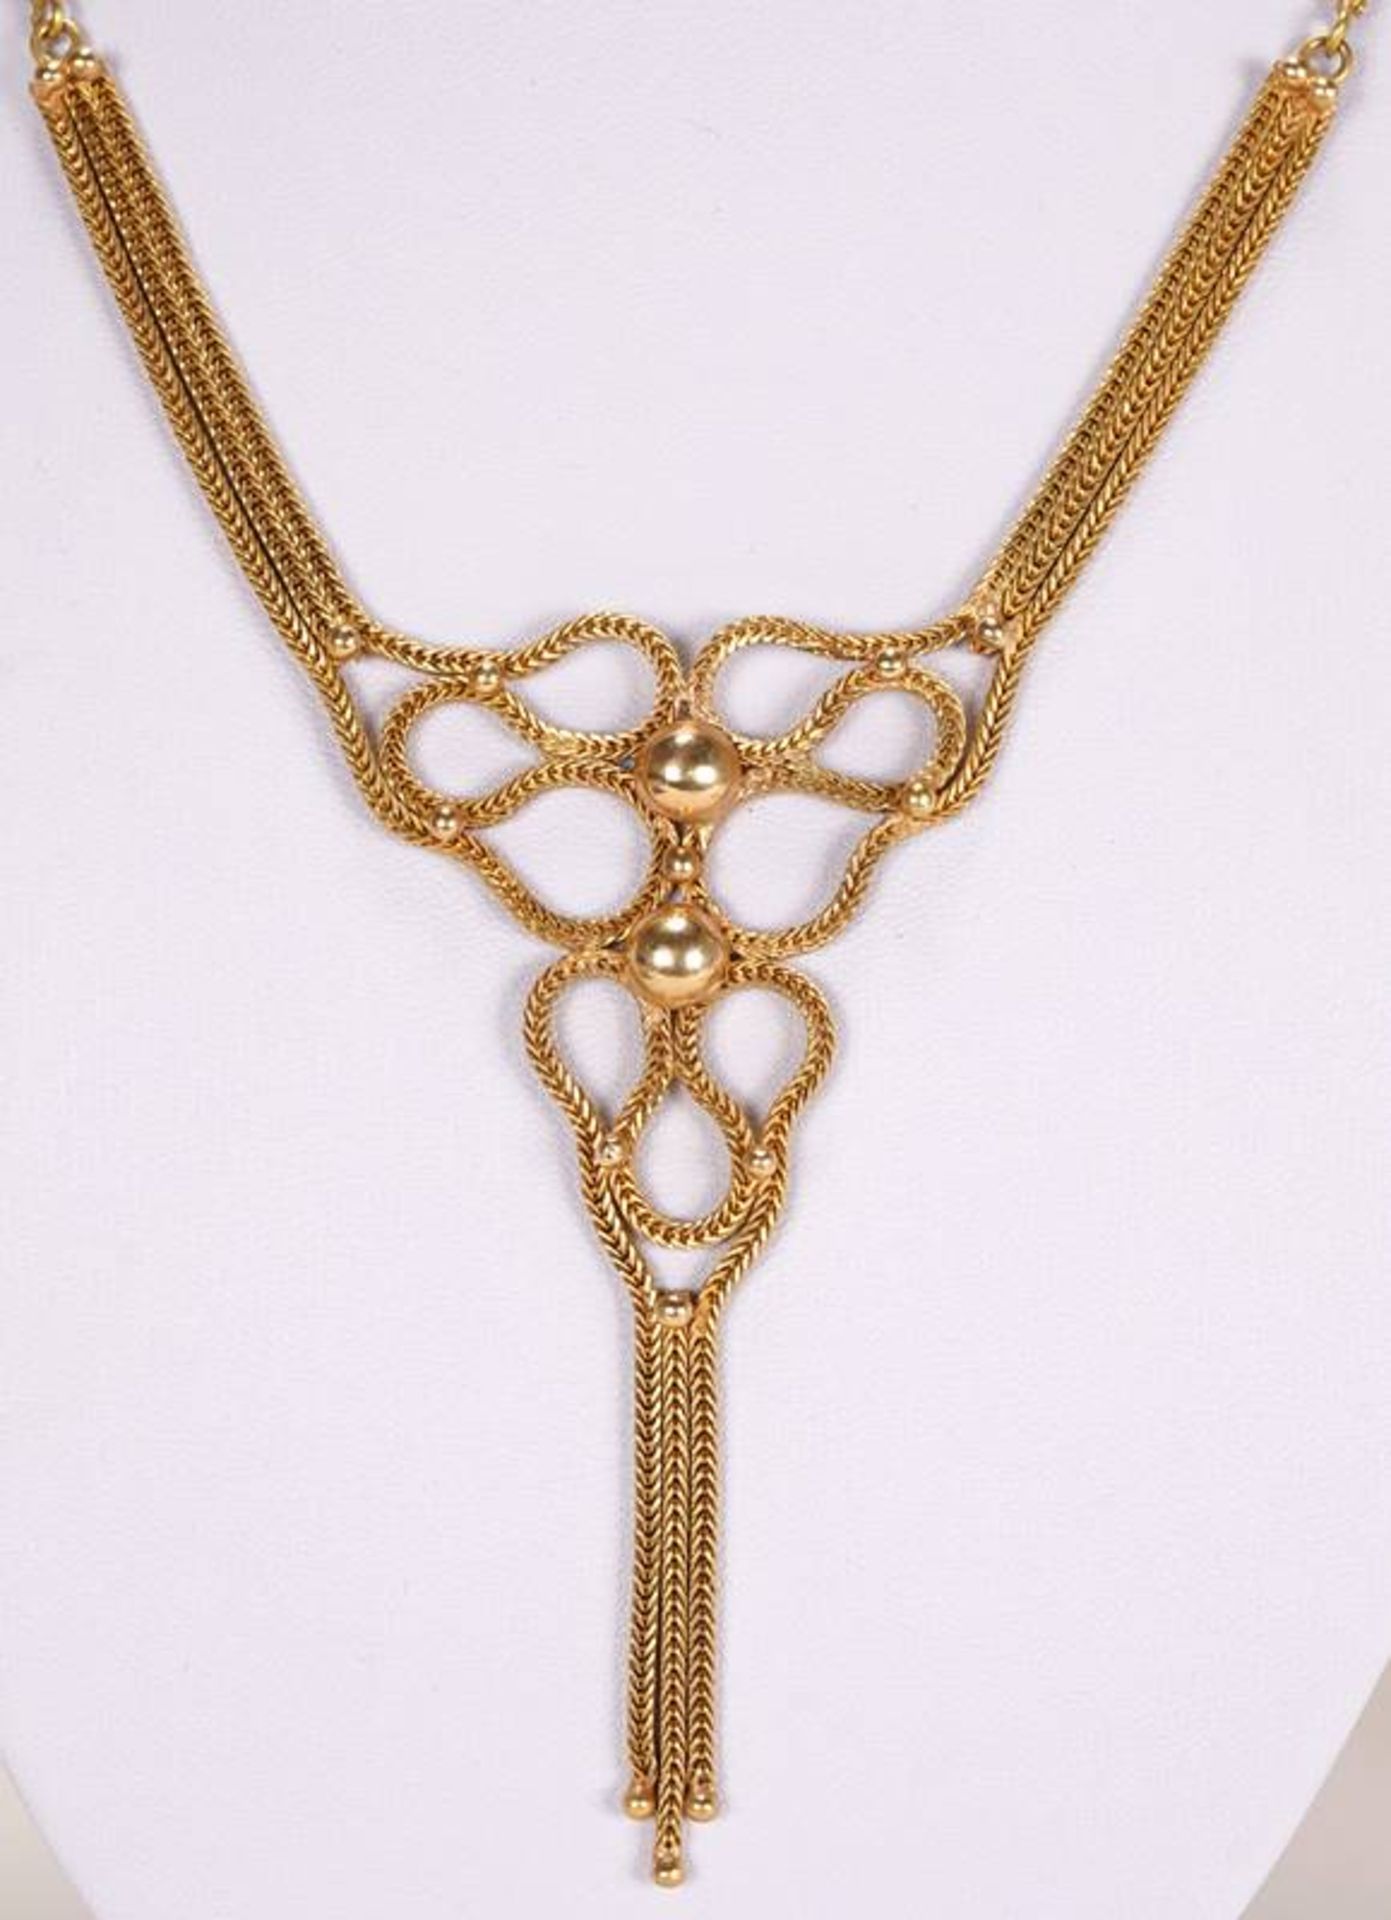 Unusual necklace - Image 2 of 2